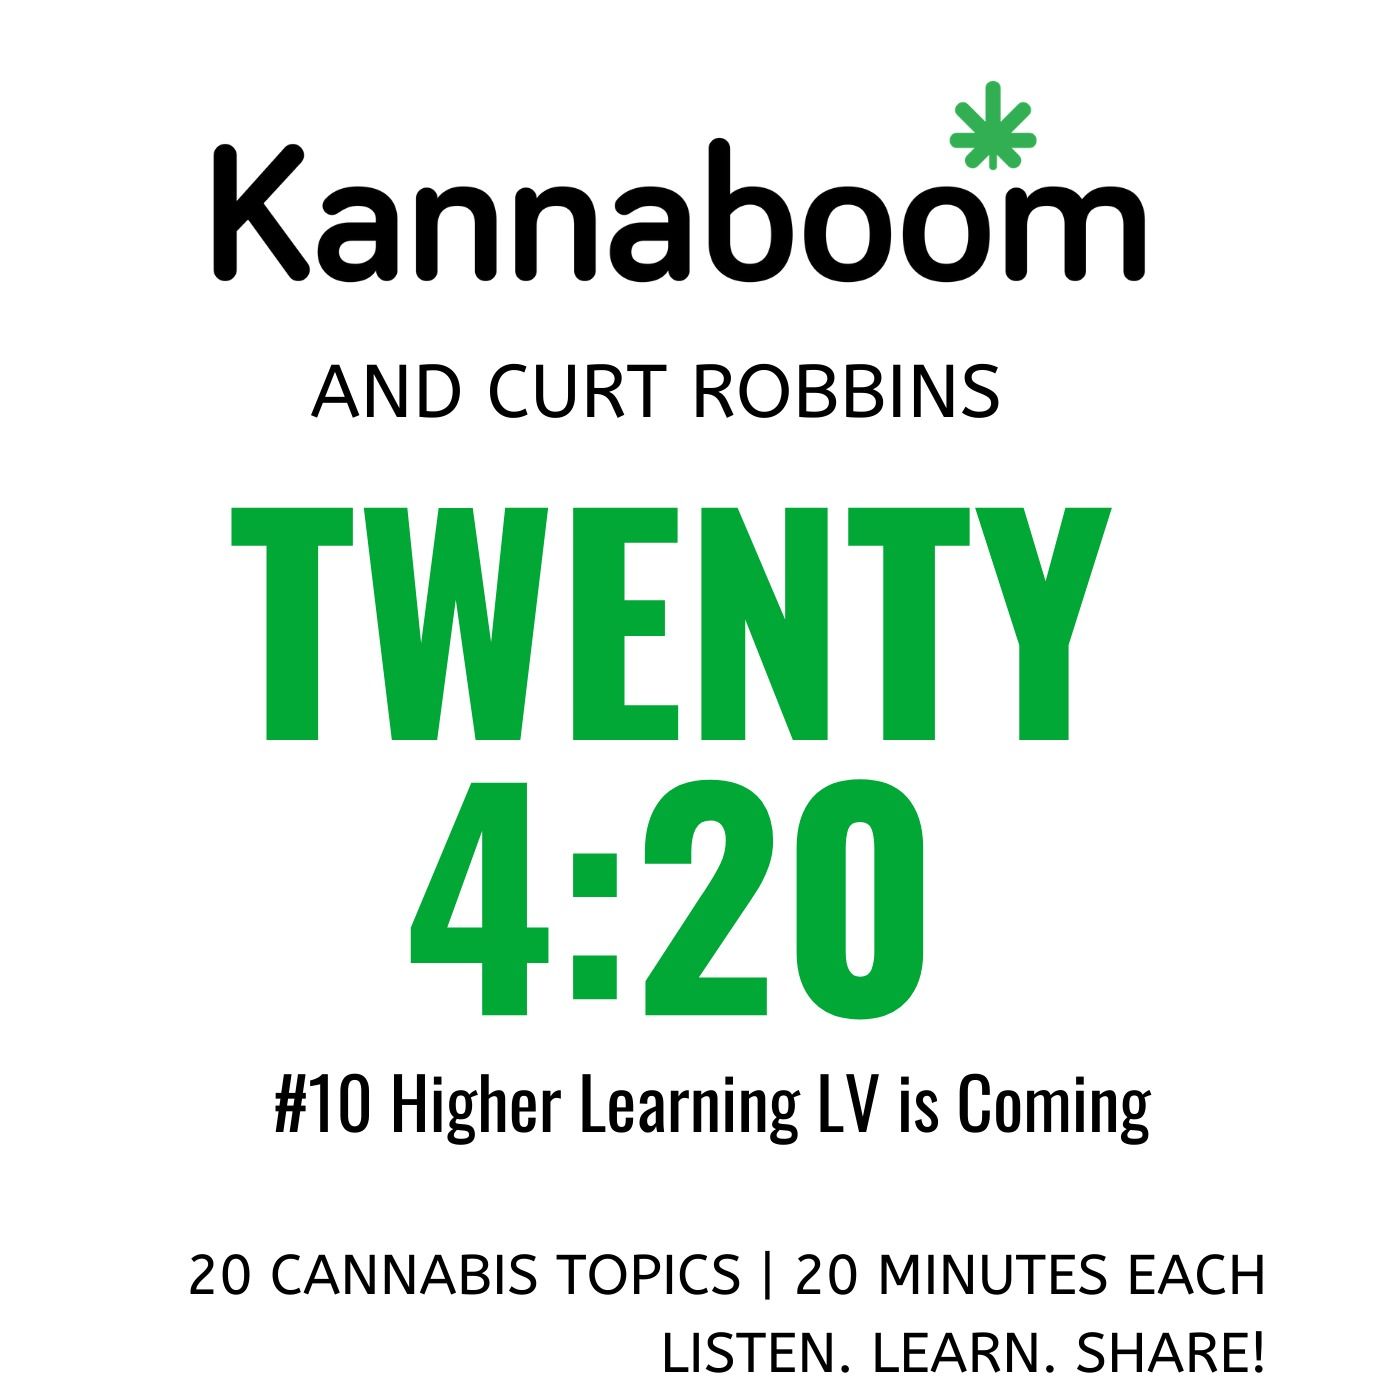 Twenty 4:20 #11 | Higher Learning LV is Coming